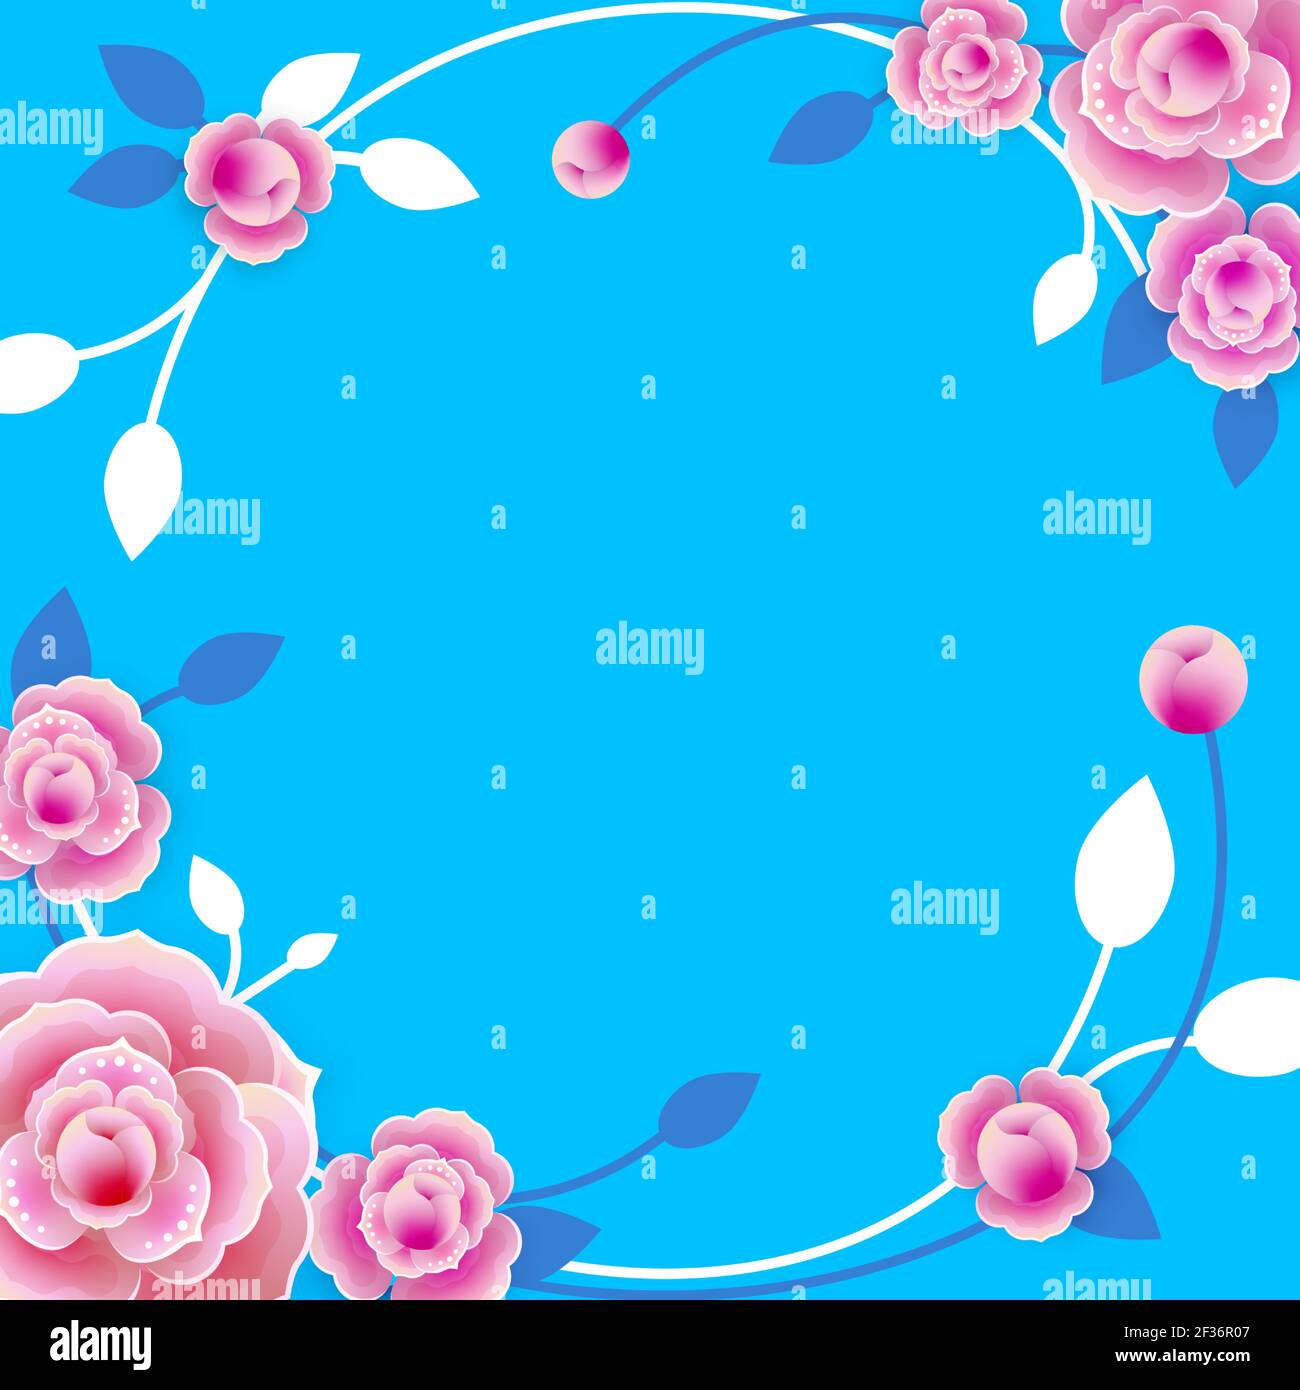 Square frame with abstract pink roses banner on a blue background, place for text. Suitable for social media advertising. Vector Stock Vector